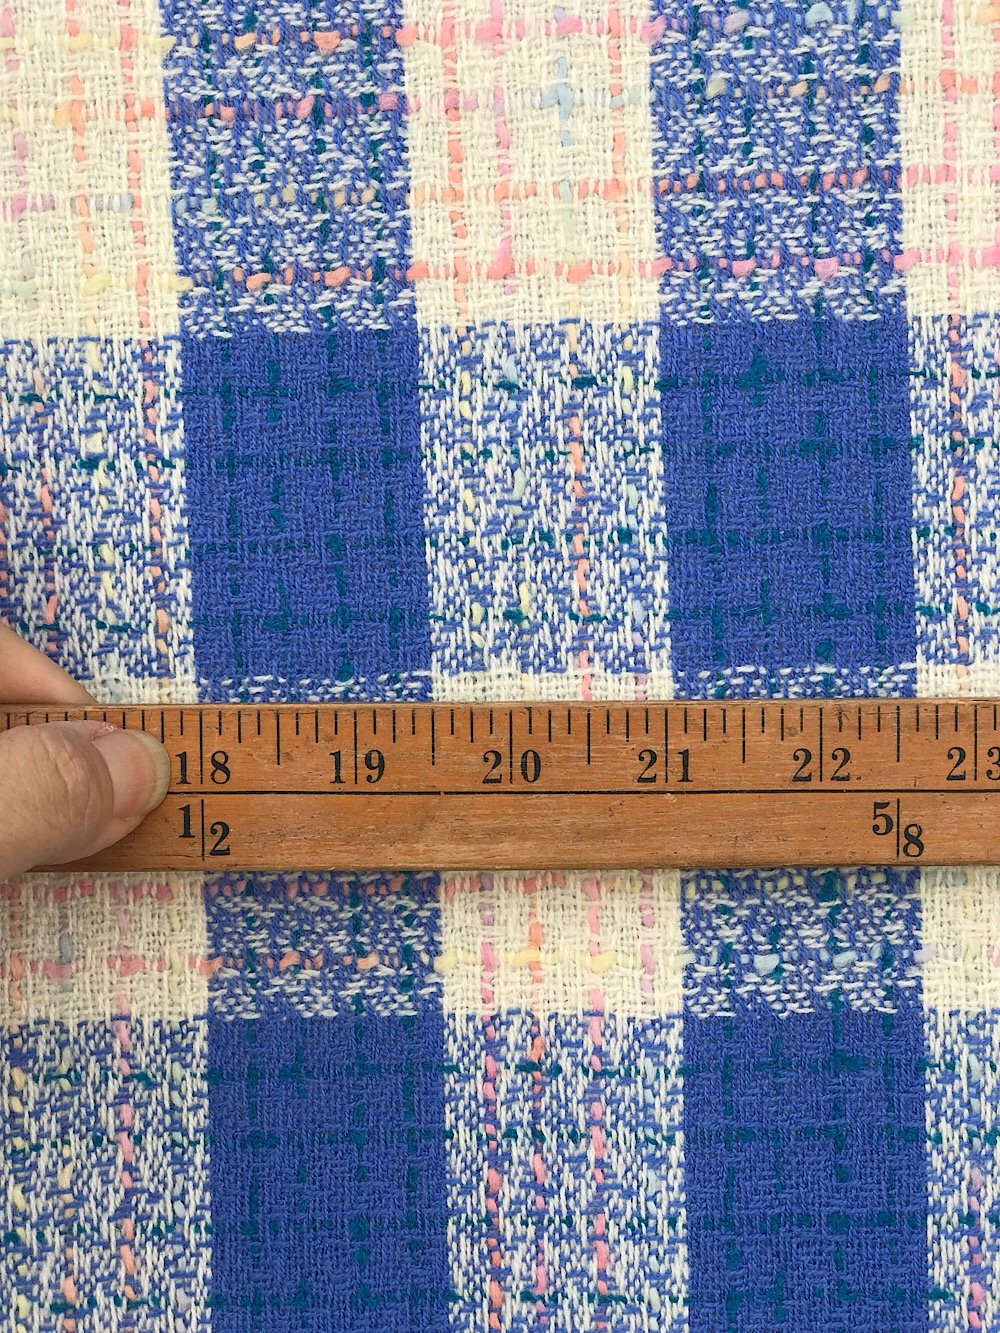 blue white pink large check wool fabric, tartan plaid, fancy wool suiting, skirt, jacket coat fabric pure wool